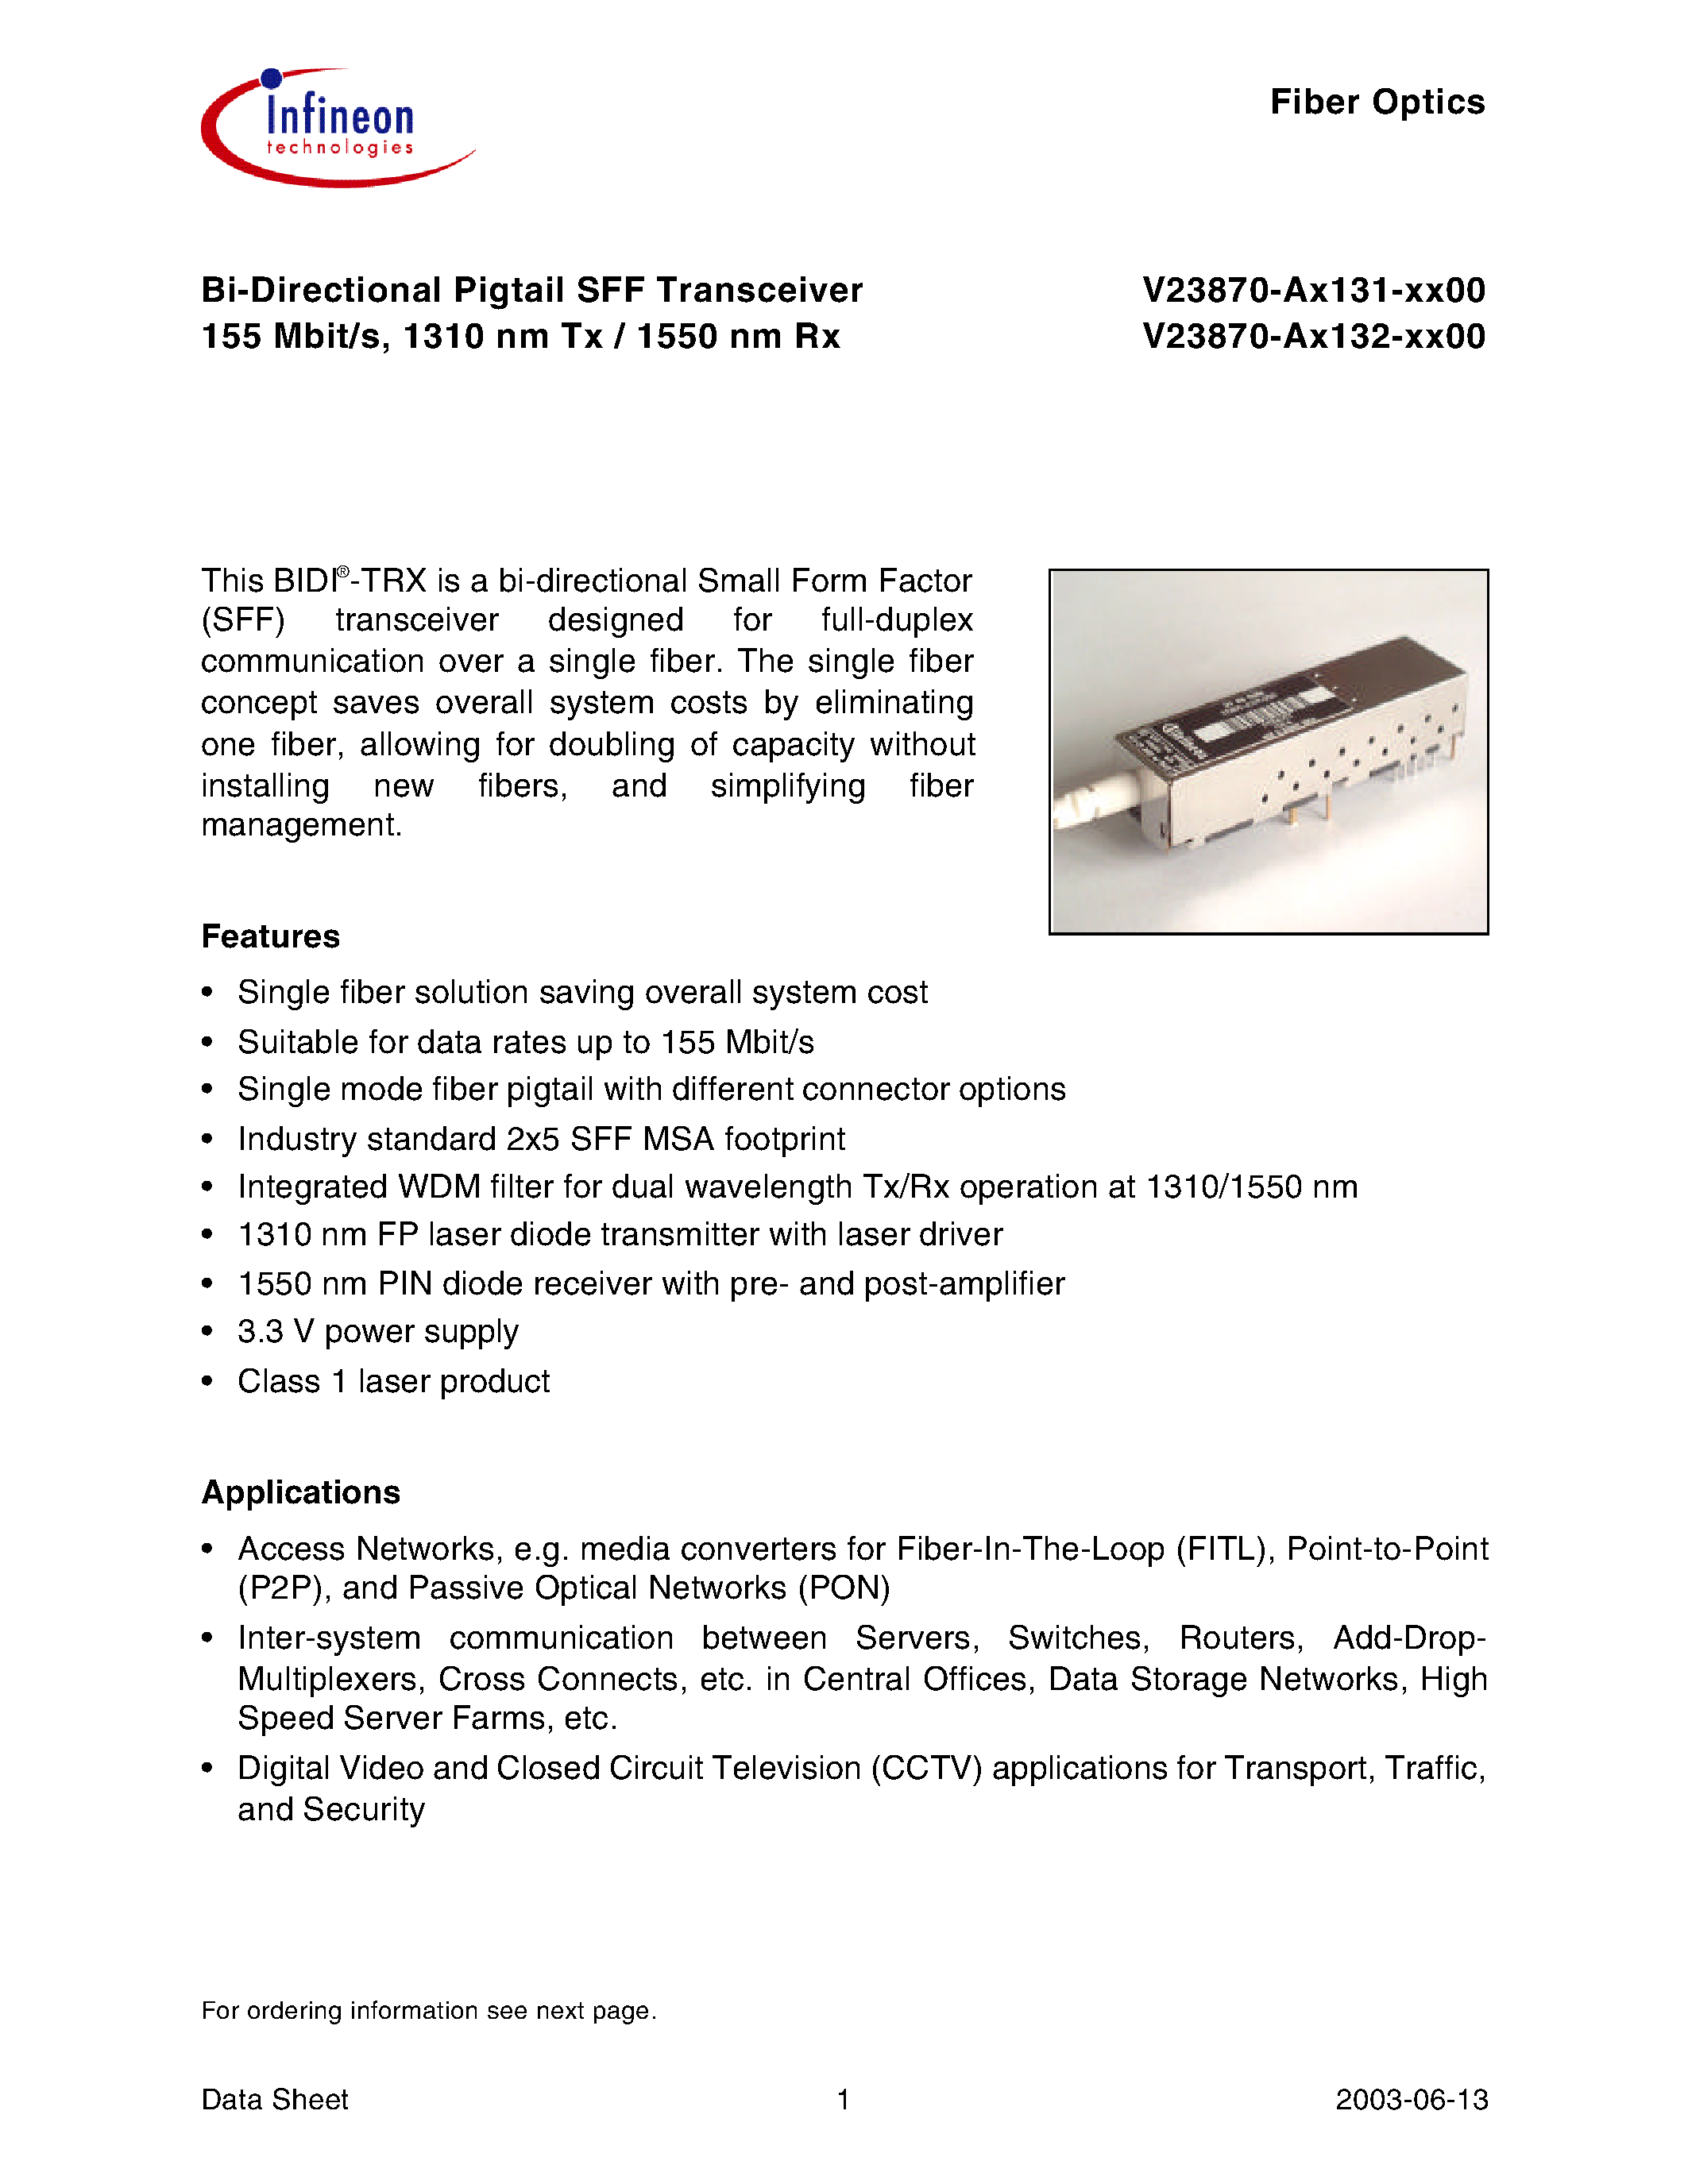 Datasheet V23870-A3132-C100 - Bi-Directional Pigtail SFF Transceiver 155 Mbit/s/ 1310 nm Tx / 1550 nm Rx page 1